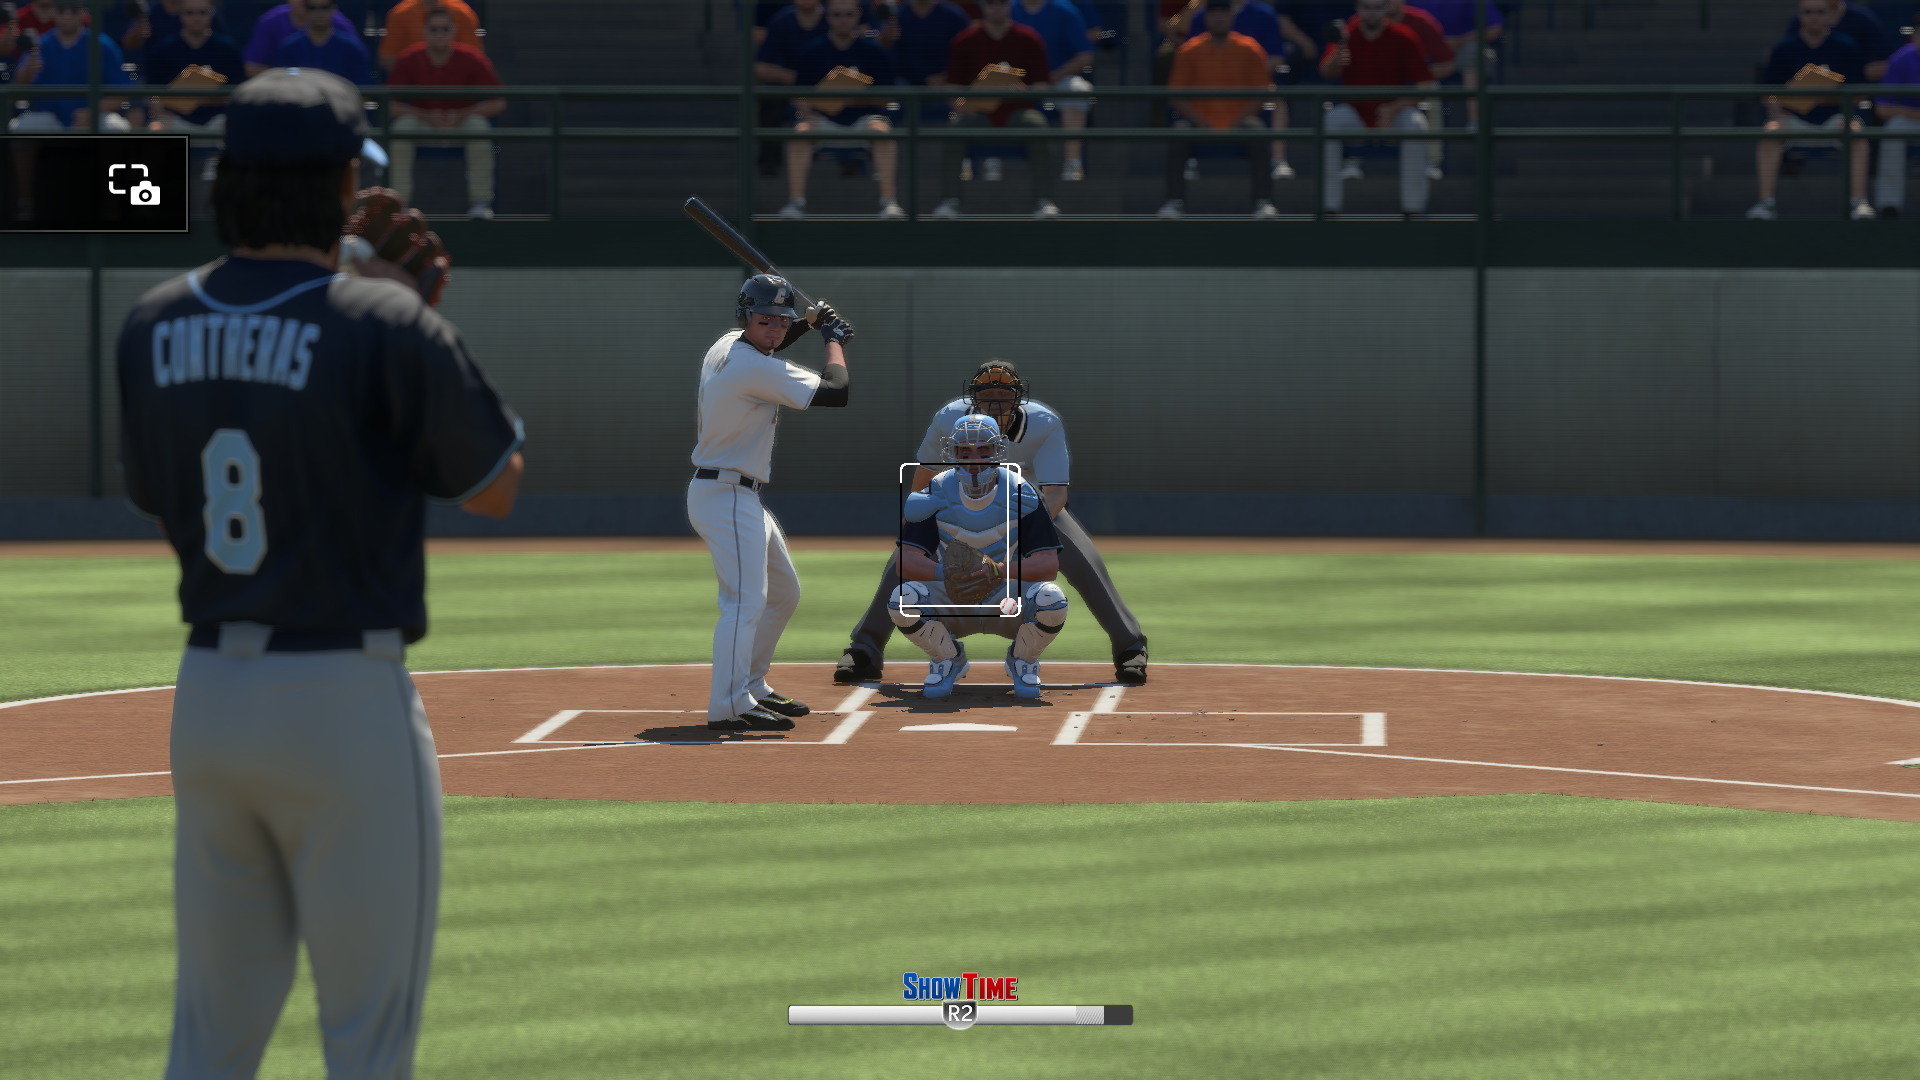 Mlb The Show 16 Review 32